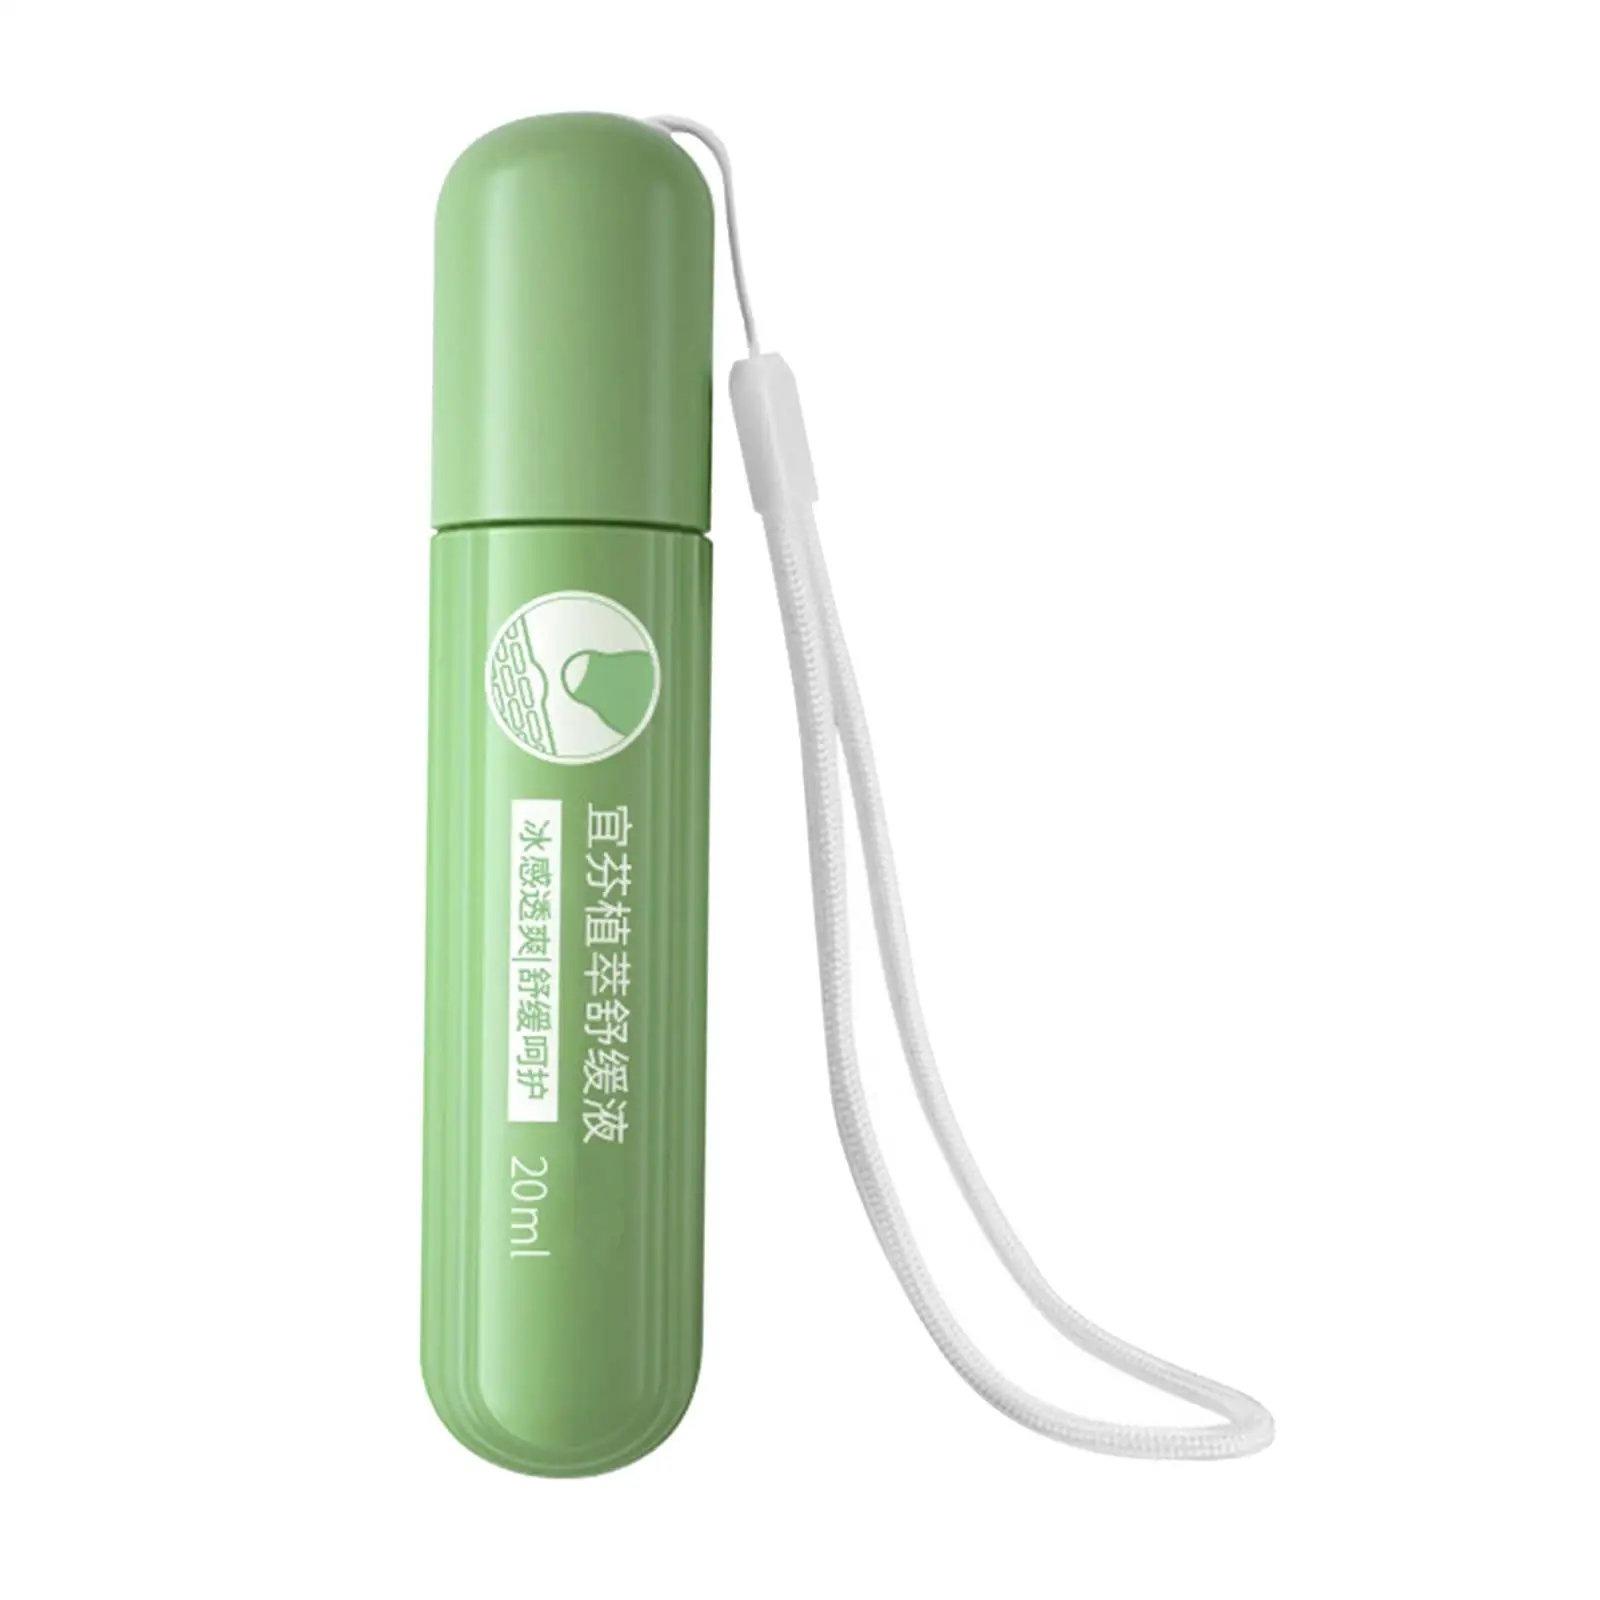 Multifunctional Bites Soothing Stick Itching Multifunctional Repellant for Sleeping Travel